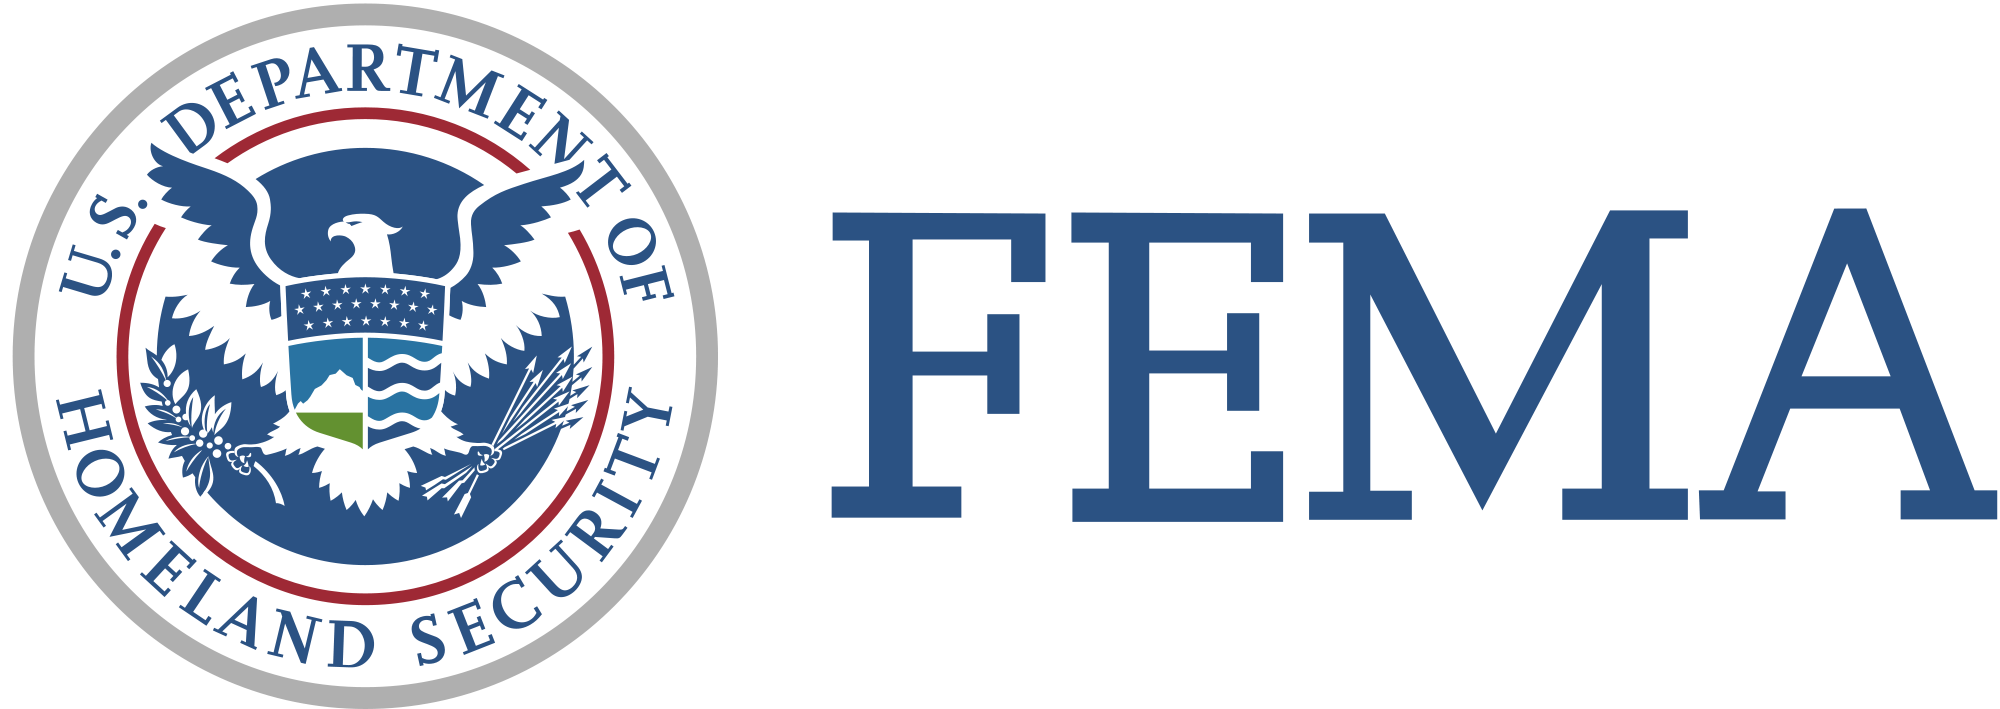 The U.S. Department of Homeland Security logo on the left (the words U.S. Department of Homeland Security circling an eagle with laurels and arrows) and the words letters F E M A on the right.